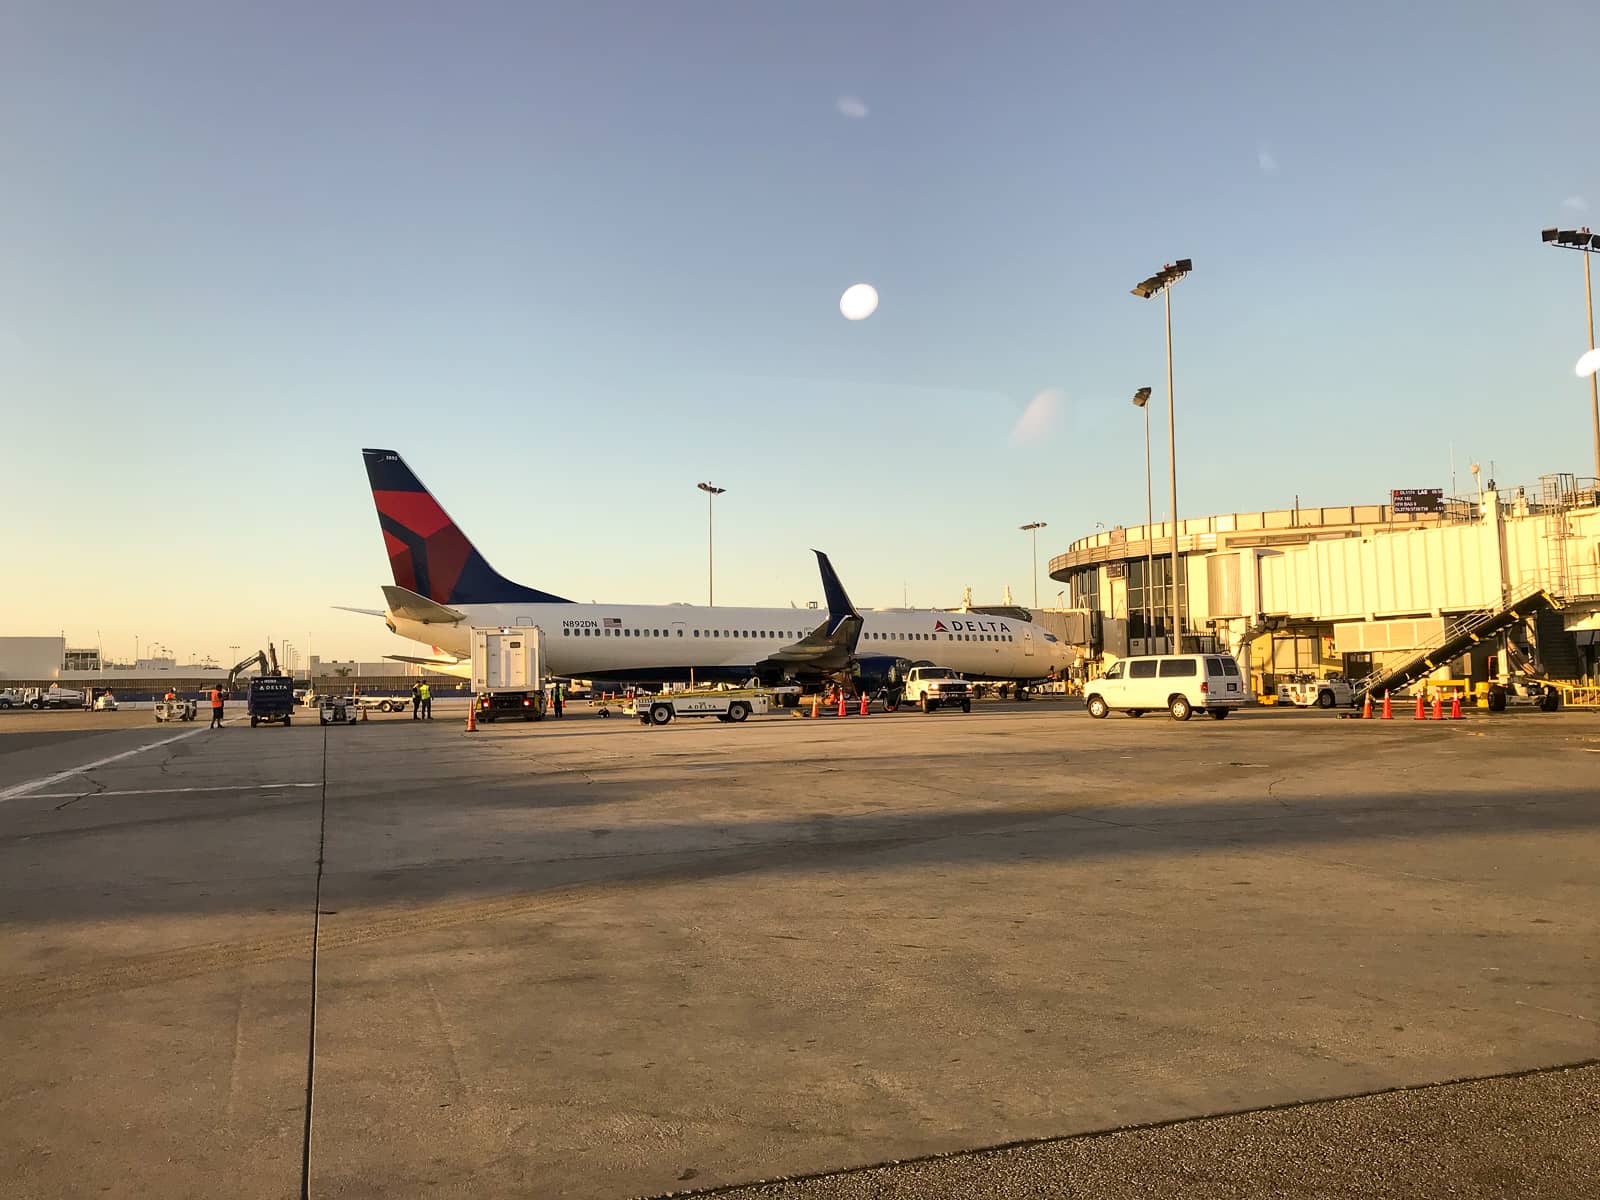 A Delta plane on the airport tarmac, shortly after sunrise